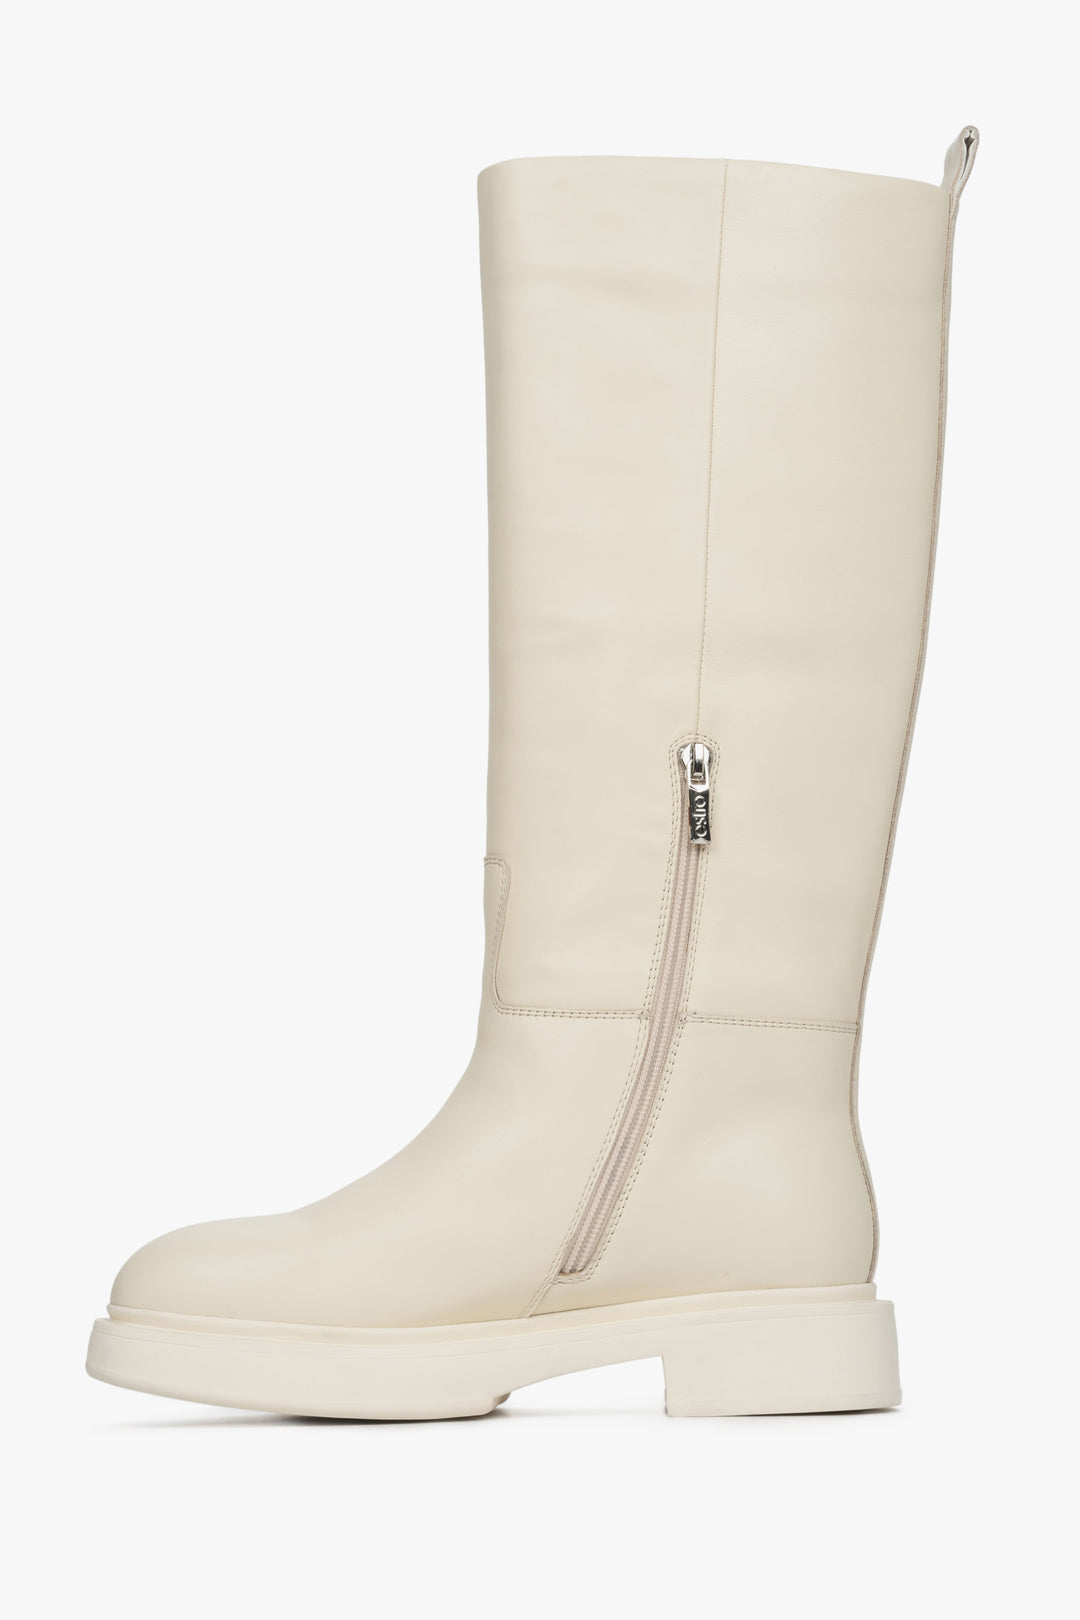 Women's high beige winter boots made of natural leather by Estro - close-up of the inner part of the seam of the boot.